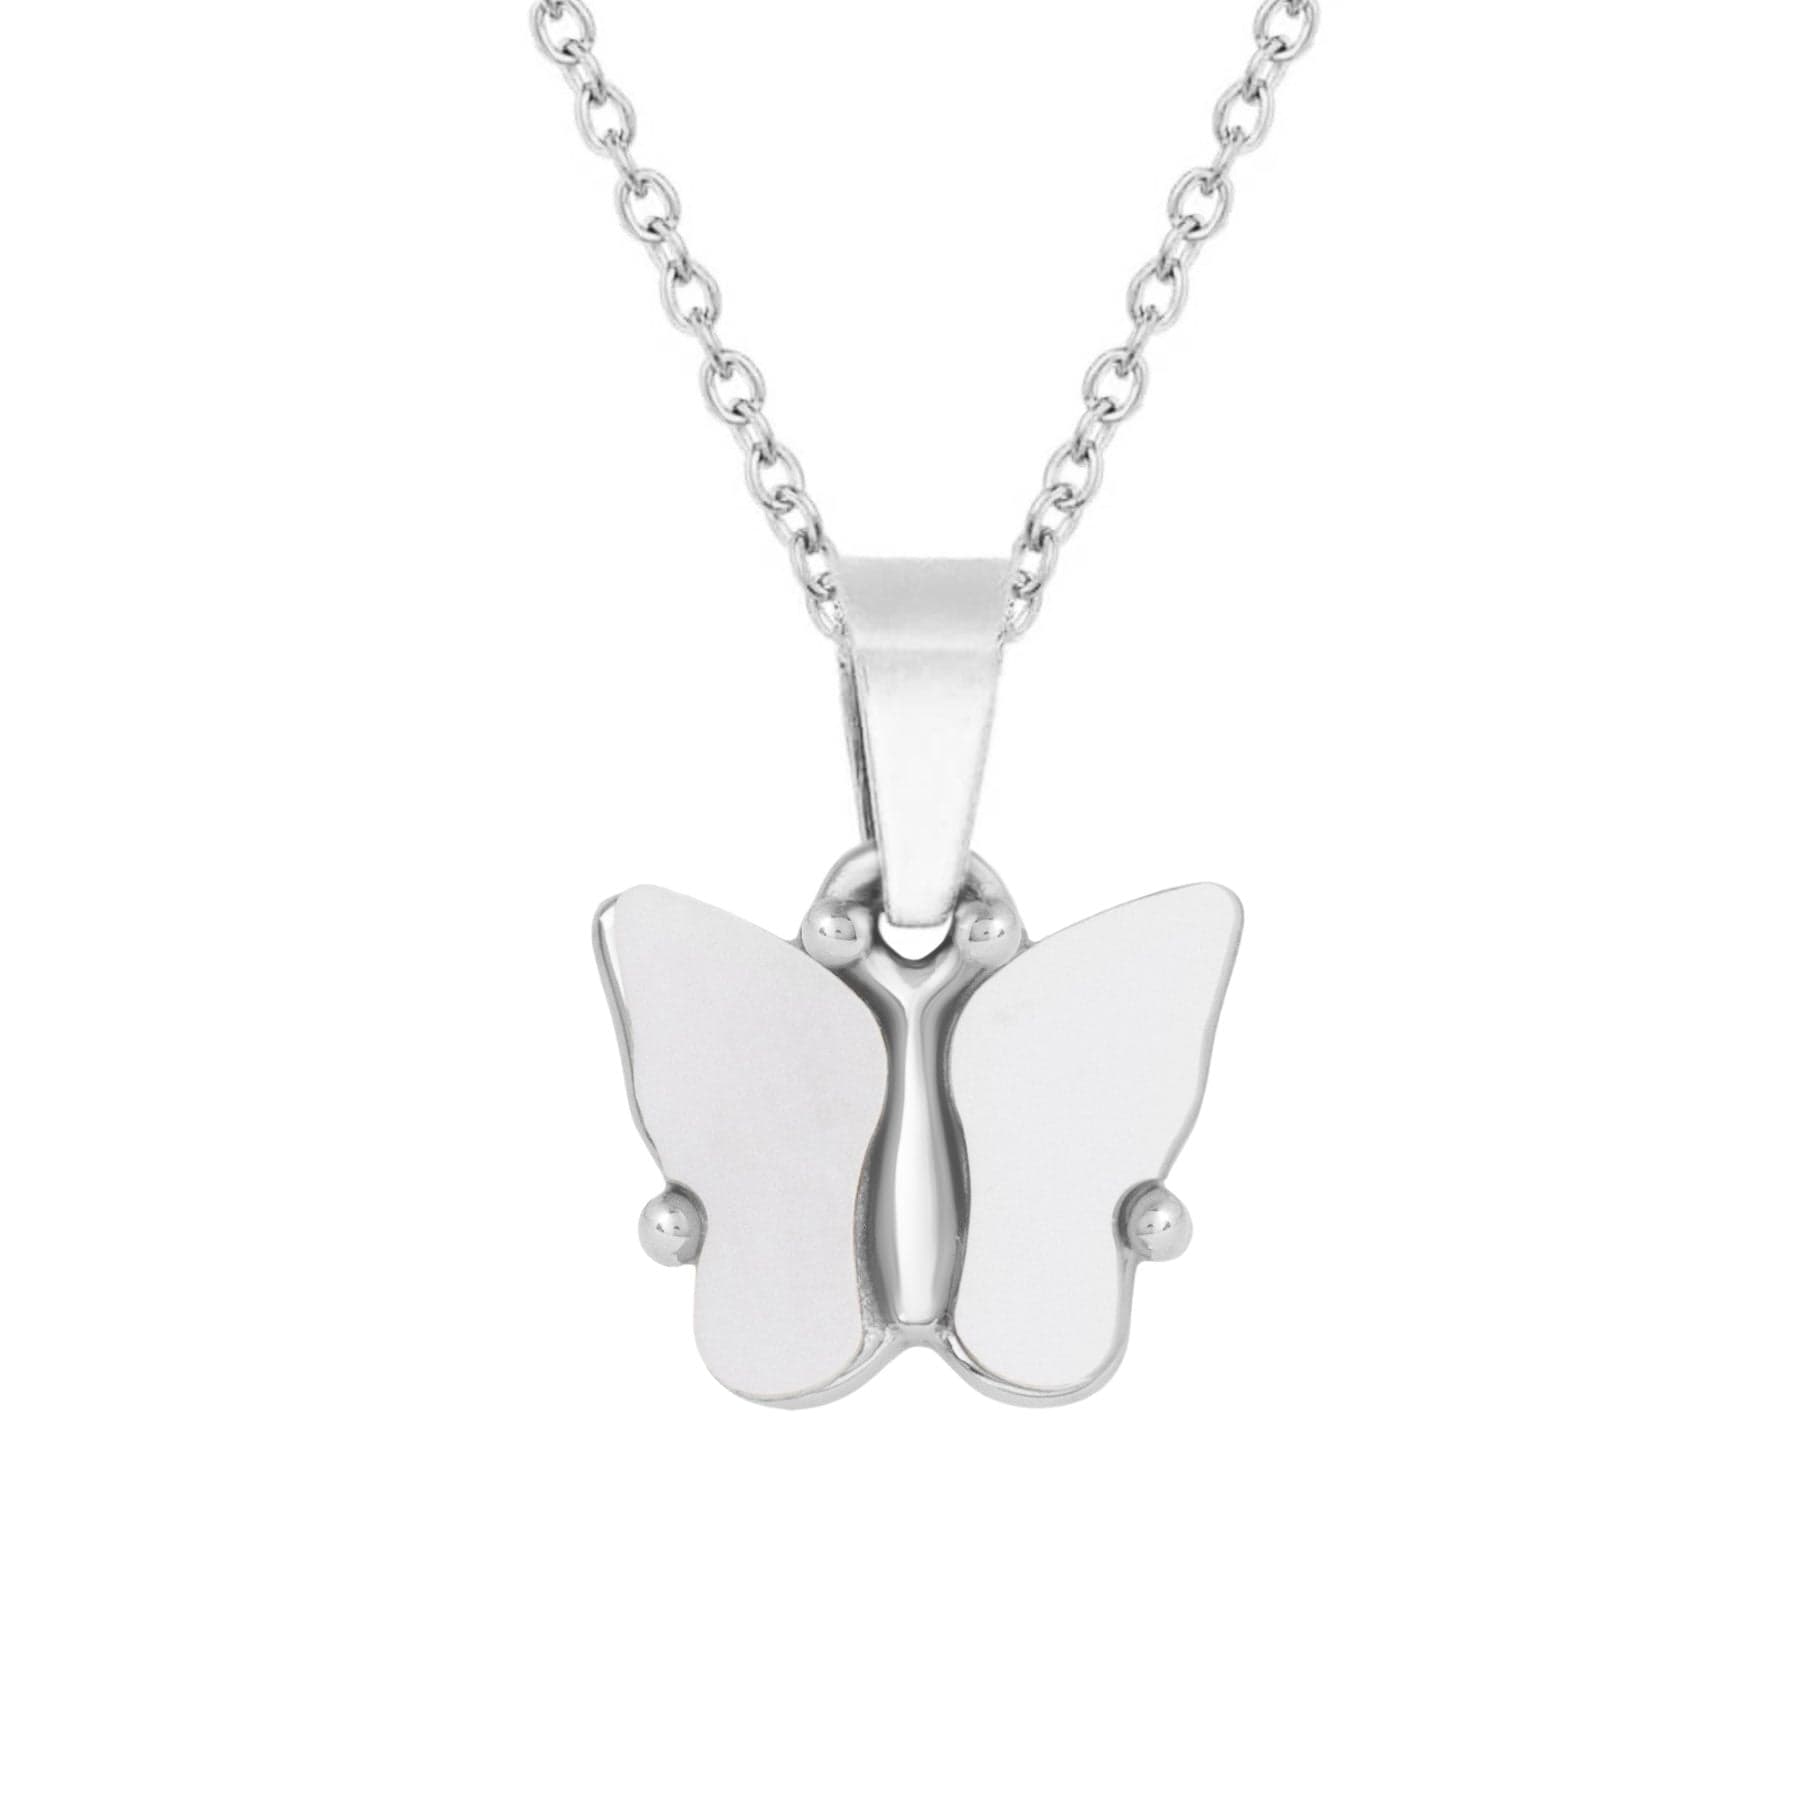 BohoMoon Stainless Steel Royale Butterfly Necklace Silver / White